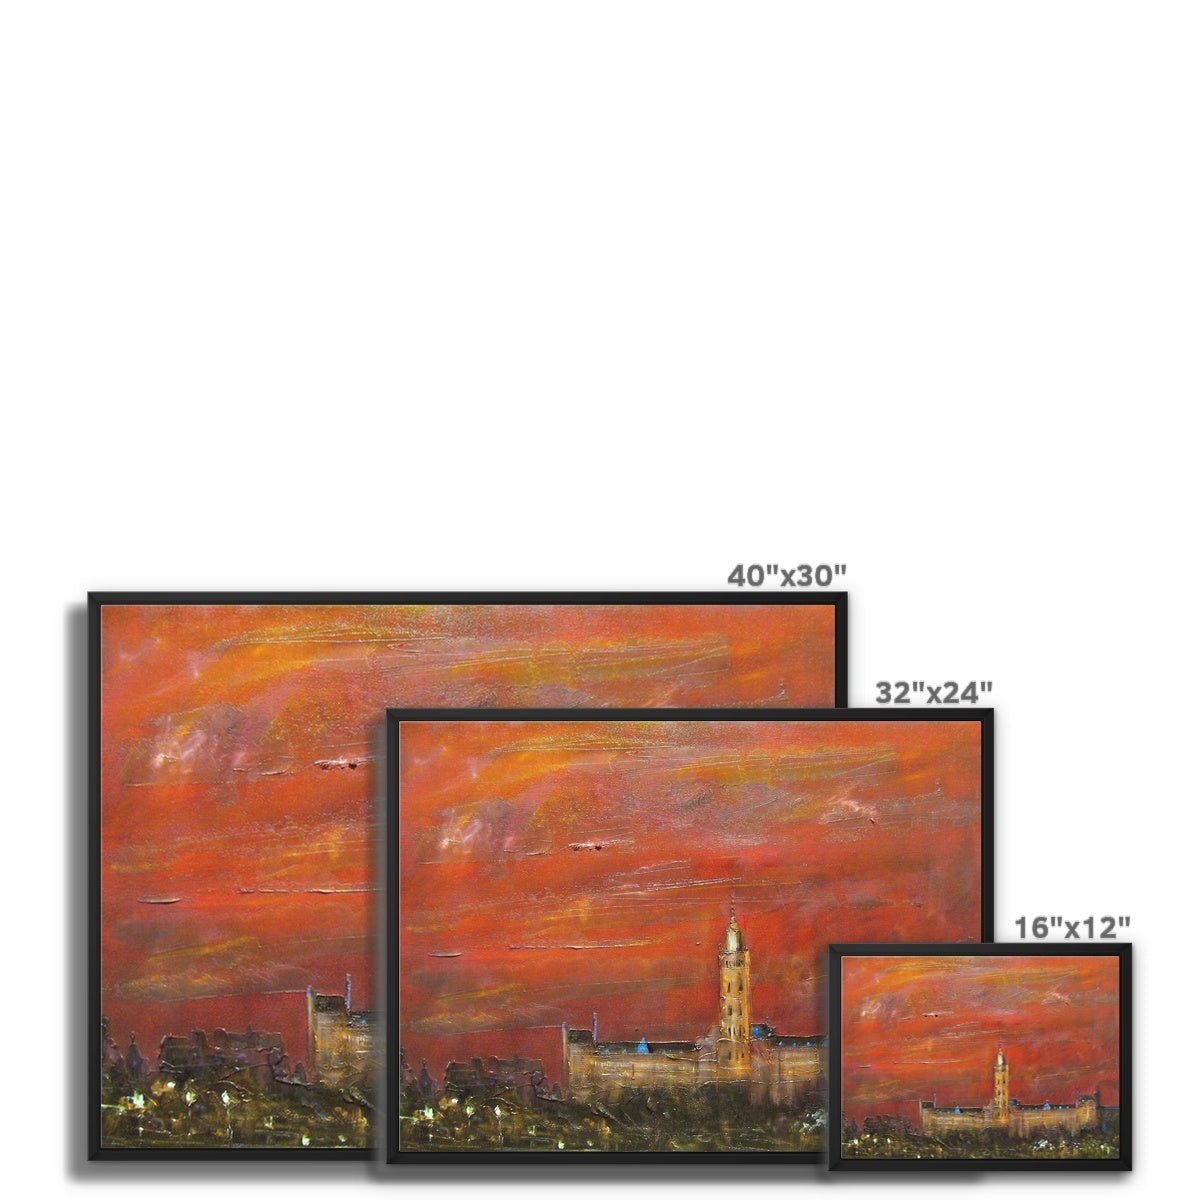 Glasgow University Dusk Painting | Framed Canvas From Scotland-Floating Framed Canvas Prints-Edinburgh & Glasgow Art Gallery-Paintings, Prints, Homeware, Art Gifts From Scotland By Scottish Artist Kevin Hunter